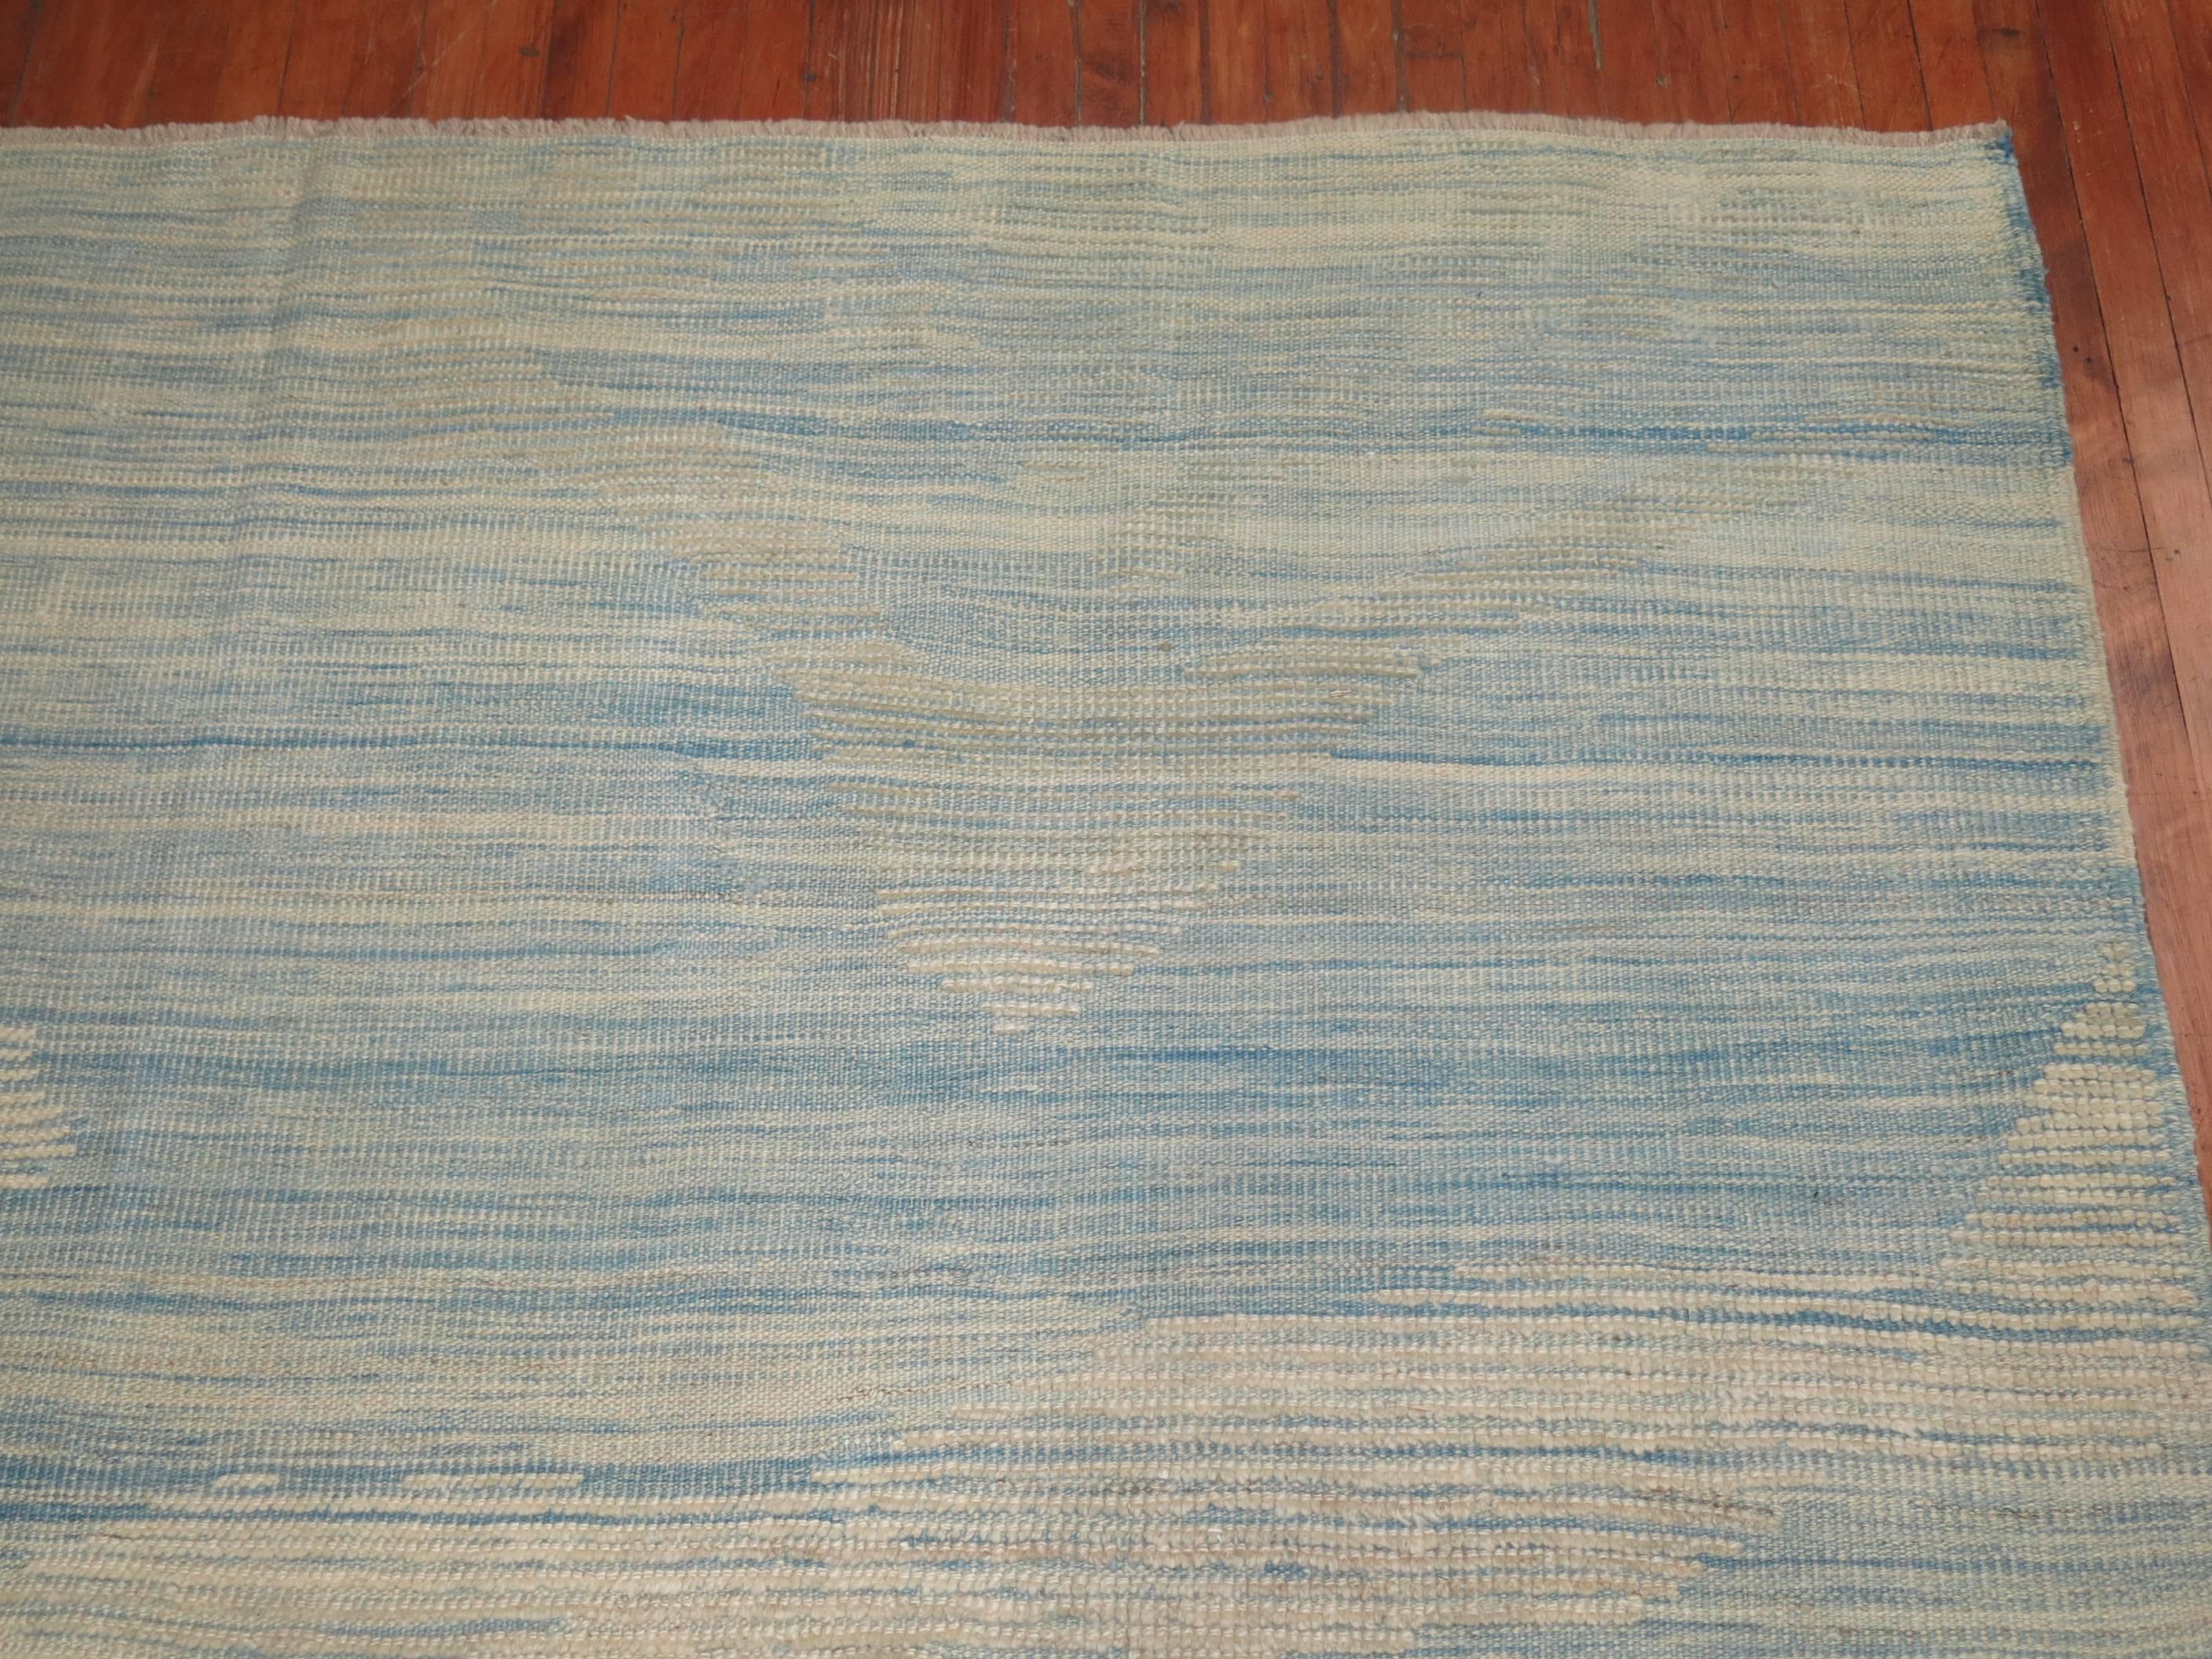 Blue Turkish Kilim Flat-Weave Wool Rug In Excellent Condition For Sale In New York, NY